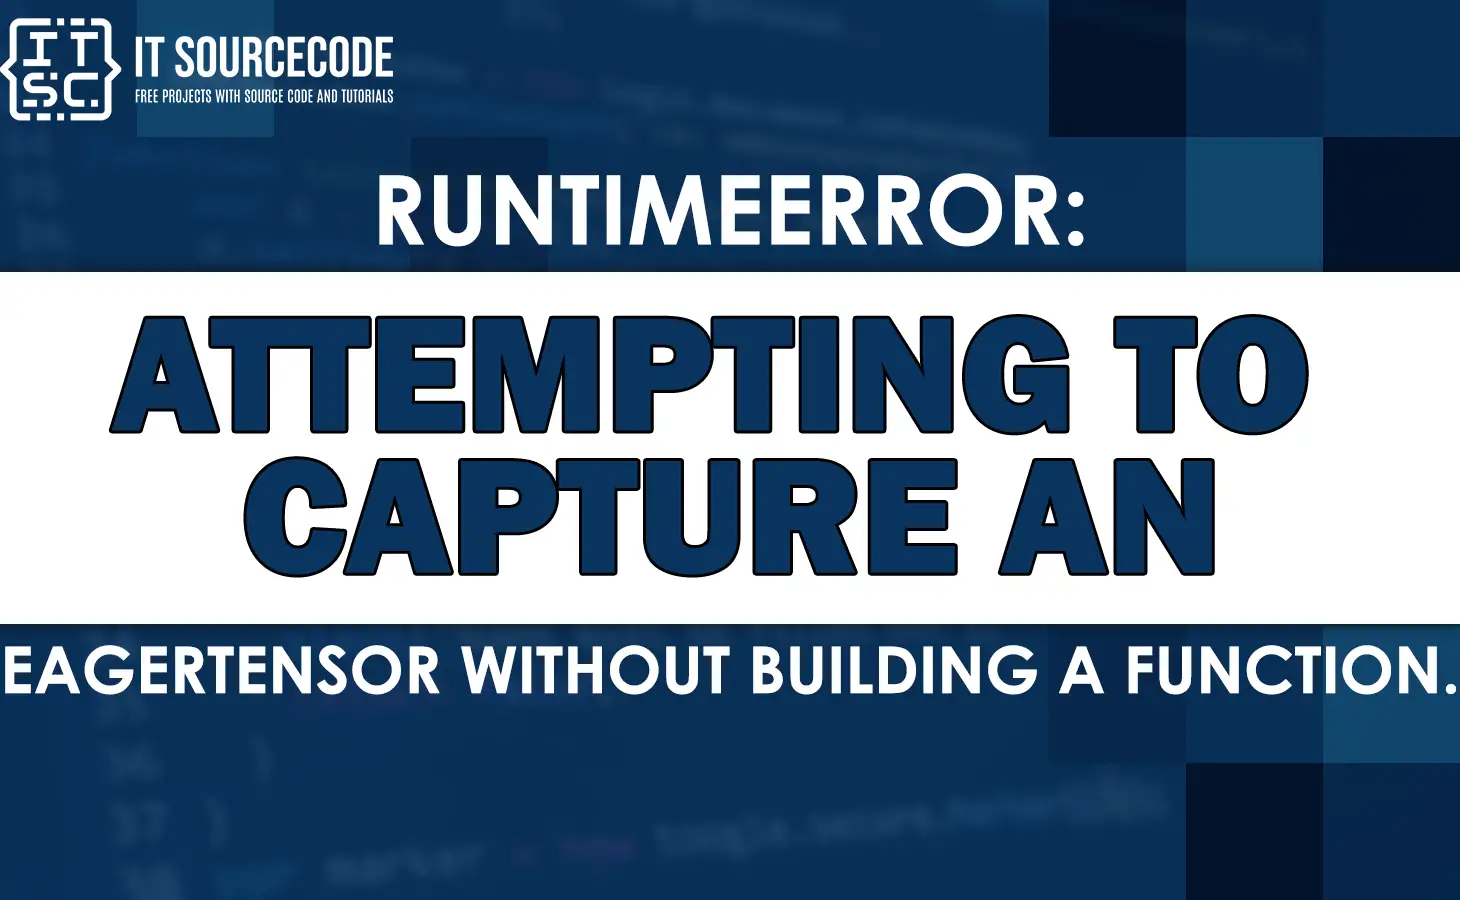 runtimeerror attempting to capture an eagertensor without building a function.